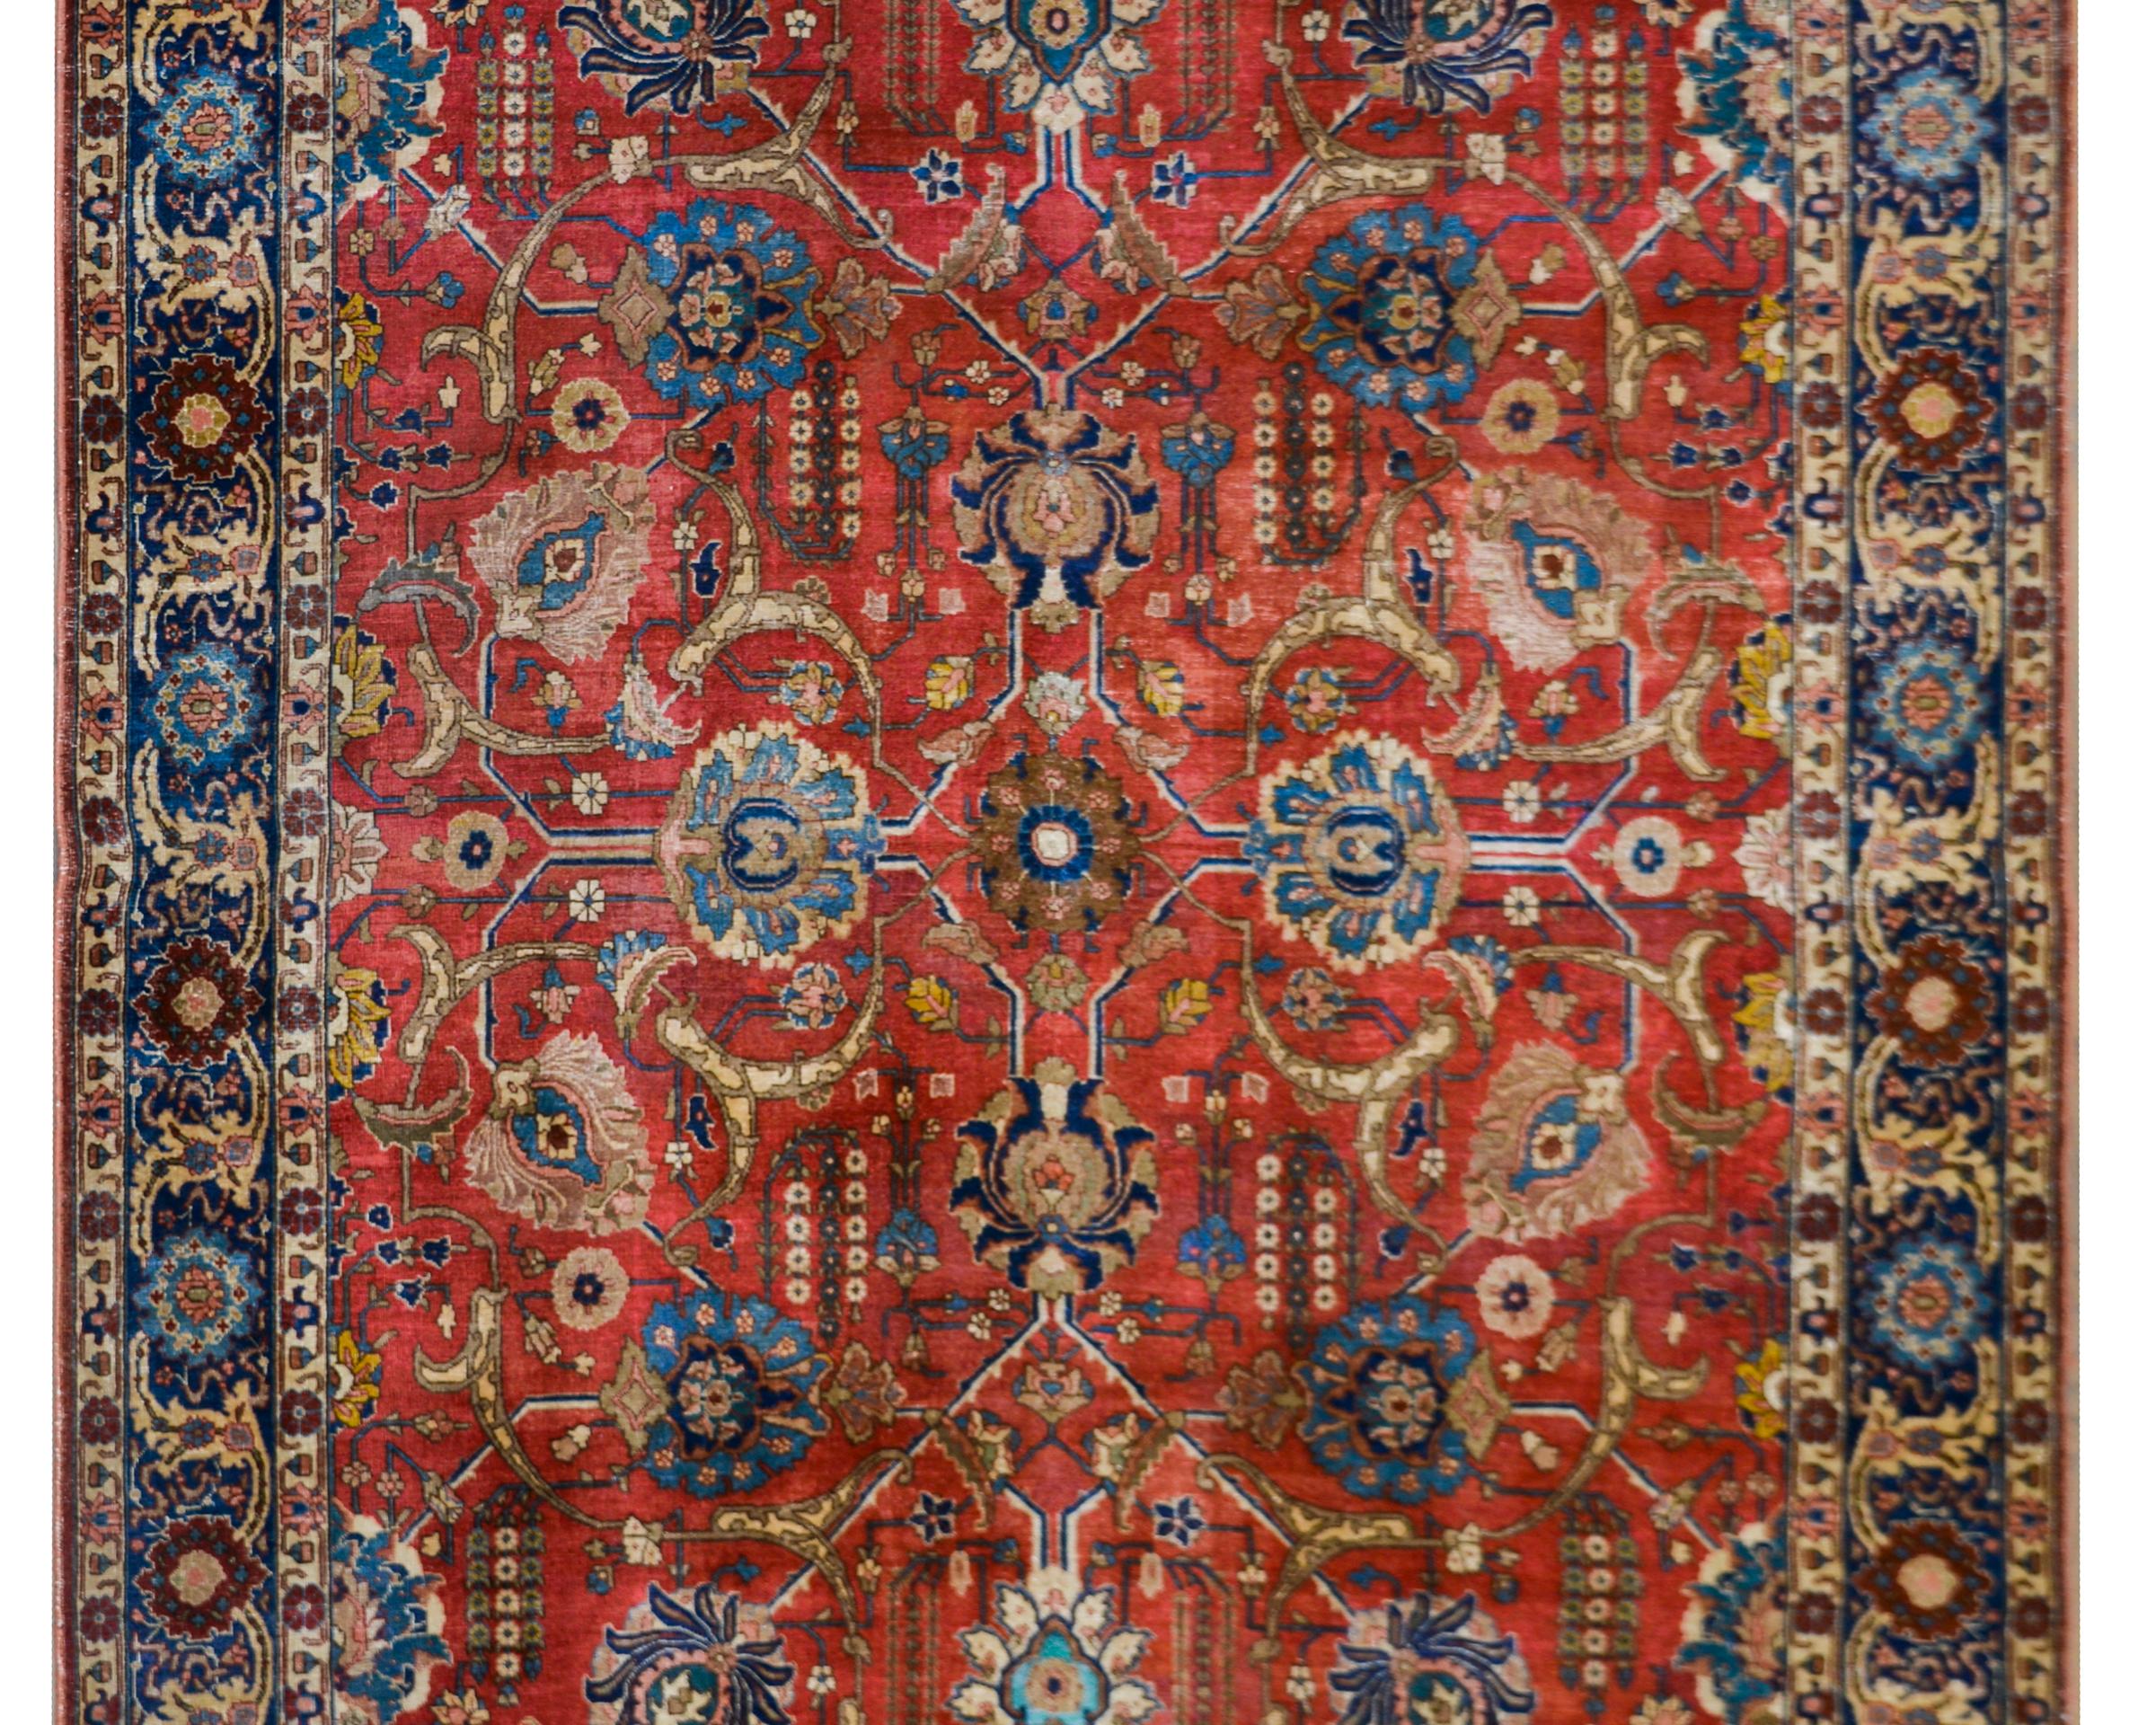 Outstanding early 20th century Persian Tabriz rug with an all-over large-scale mirror floral trellis pattern woven in beautiful rich jewel-tone colors including set against a beautiful crimson background. The border is beautiful with a wide floral